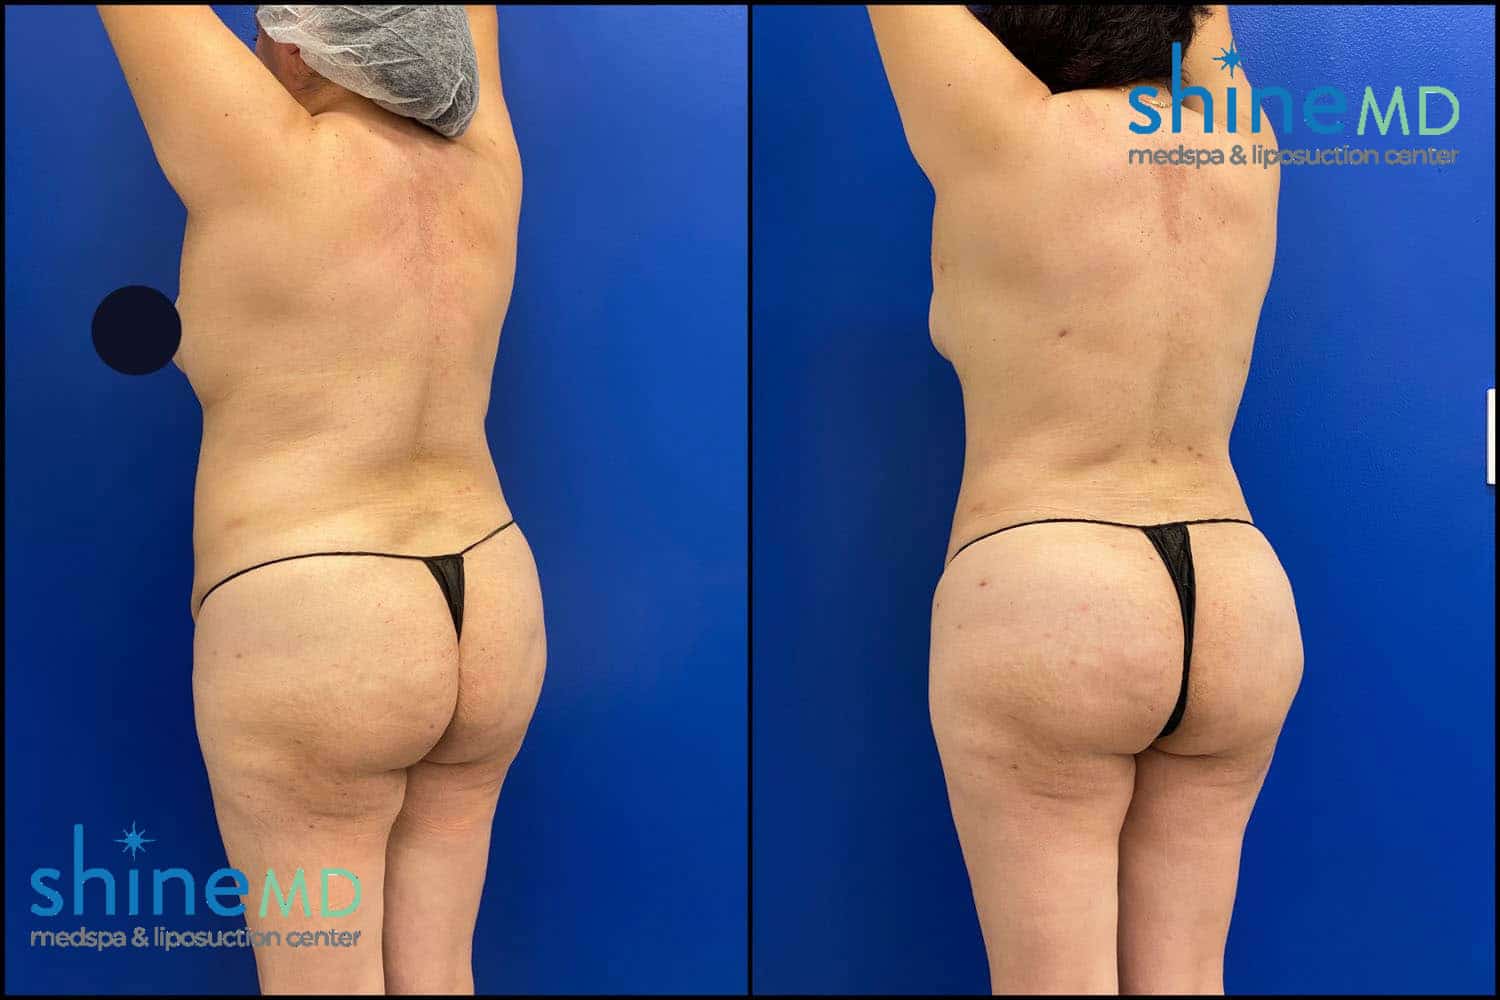 body contouring surgery before & after photos